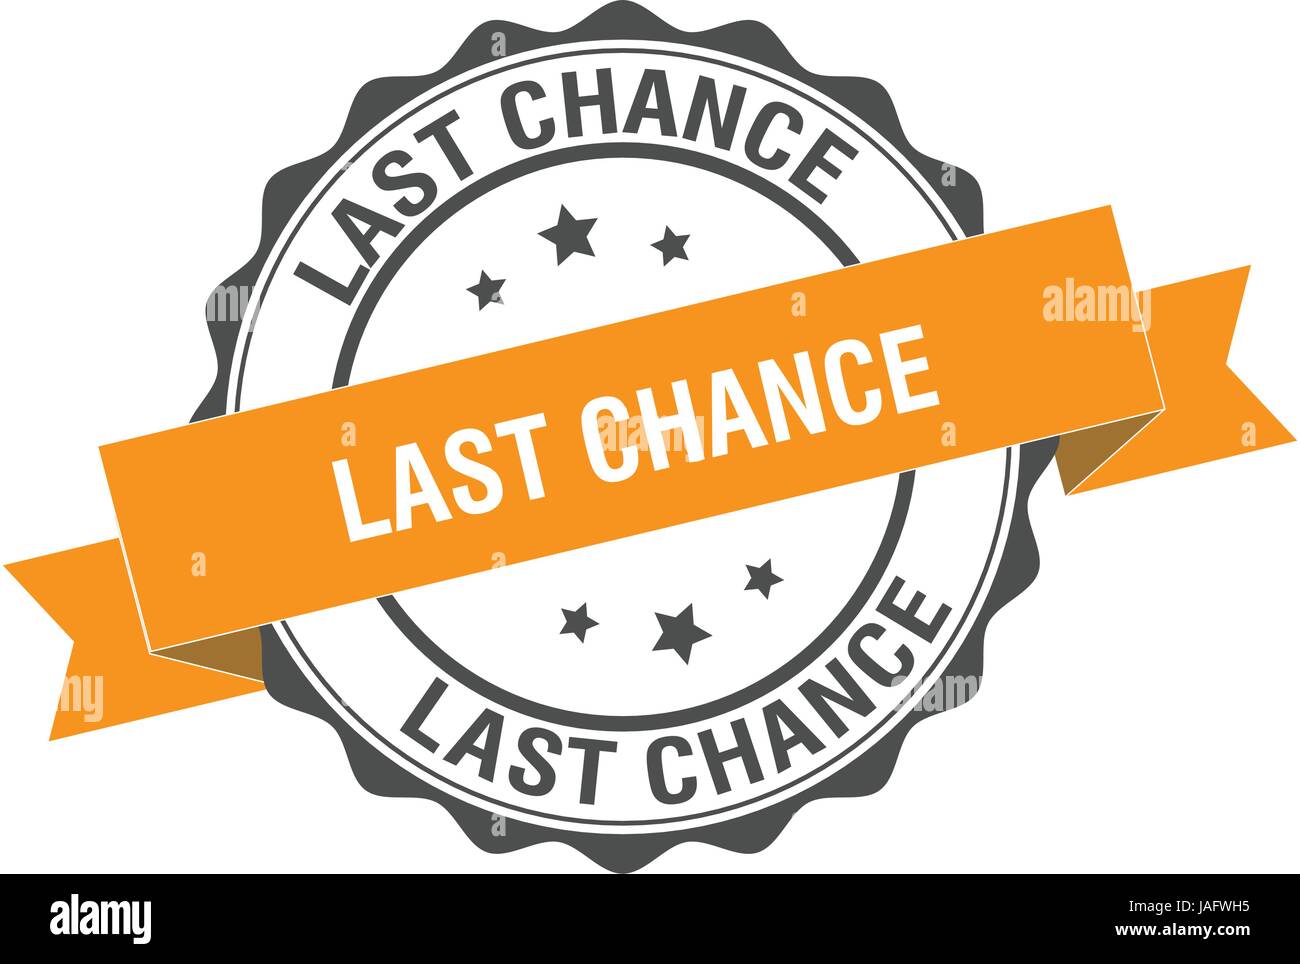 It's Time! The Last Chance Clearance Items Available Now – Stamp